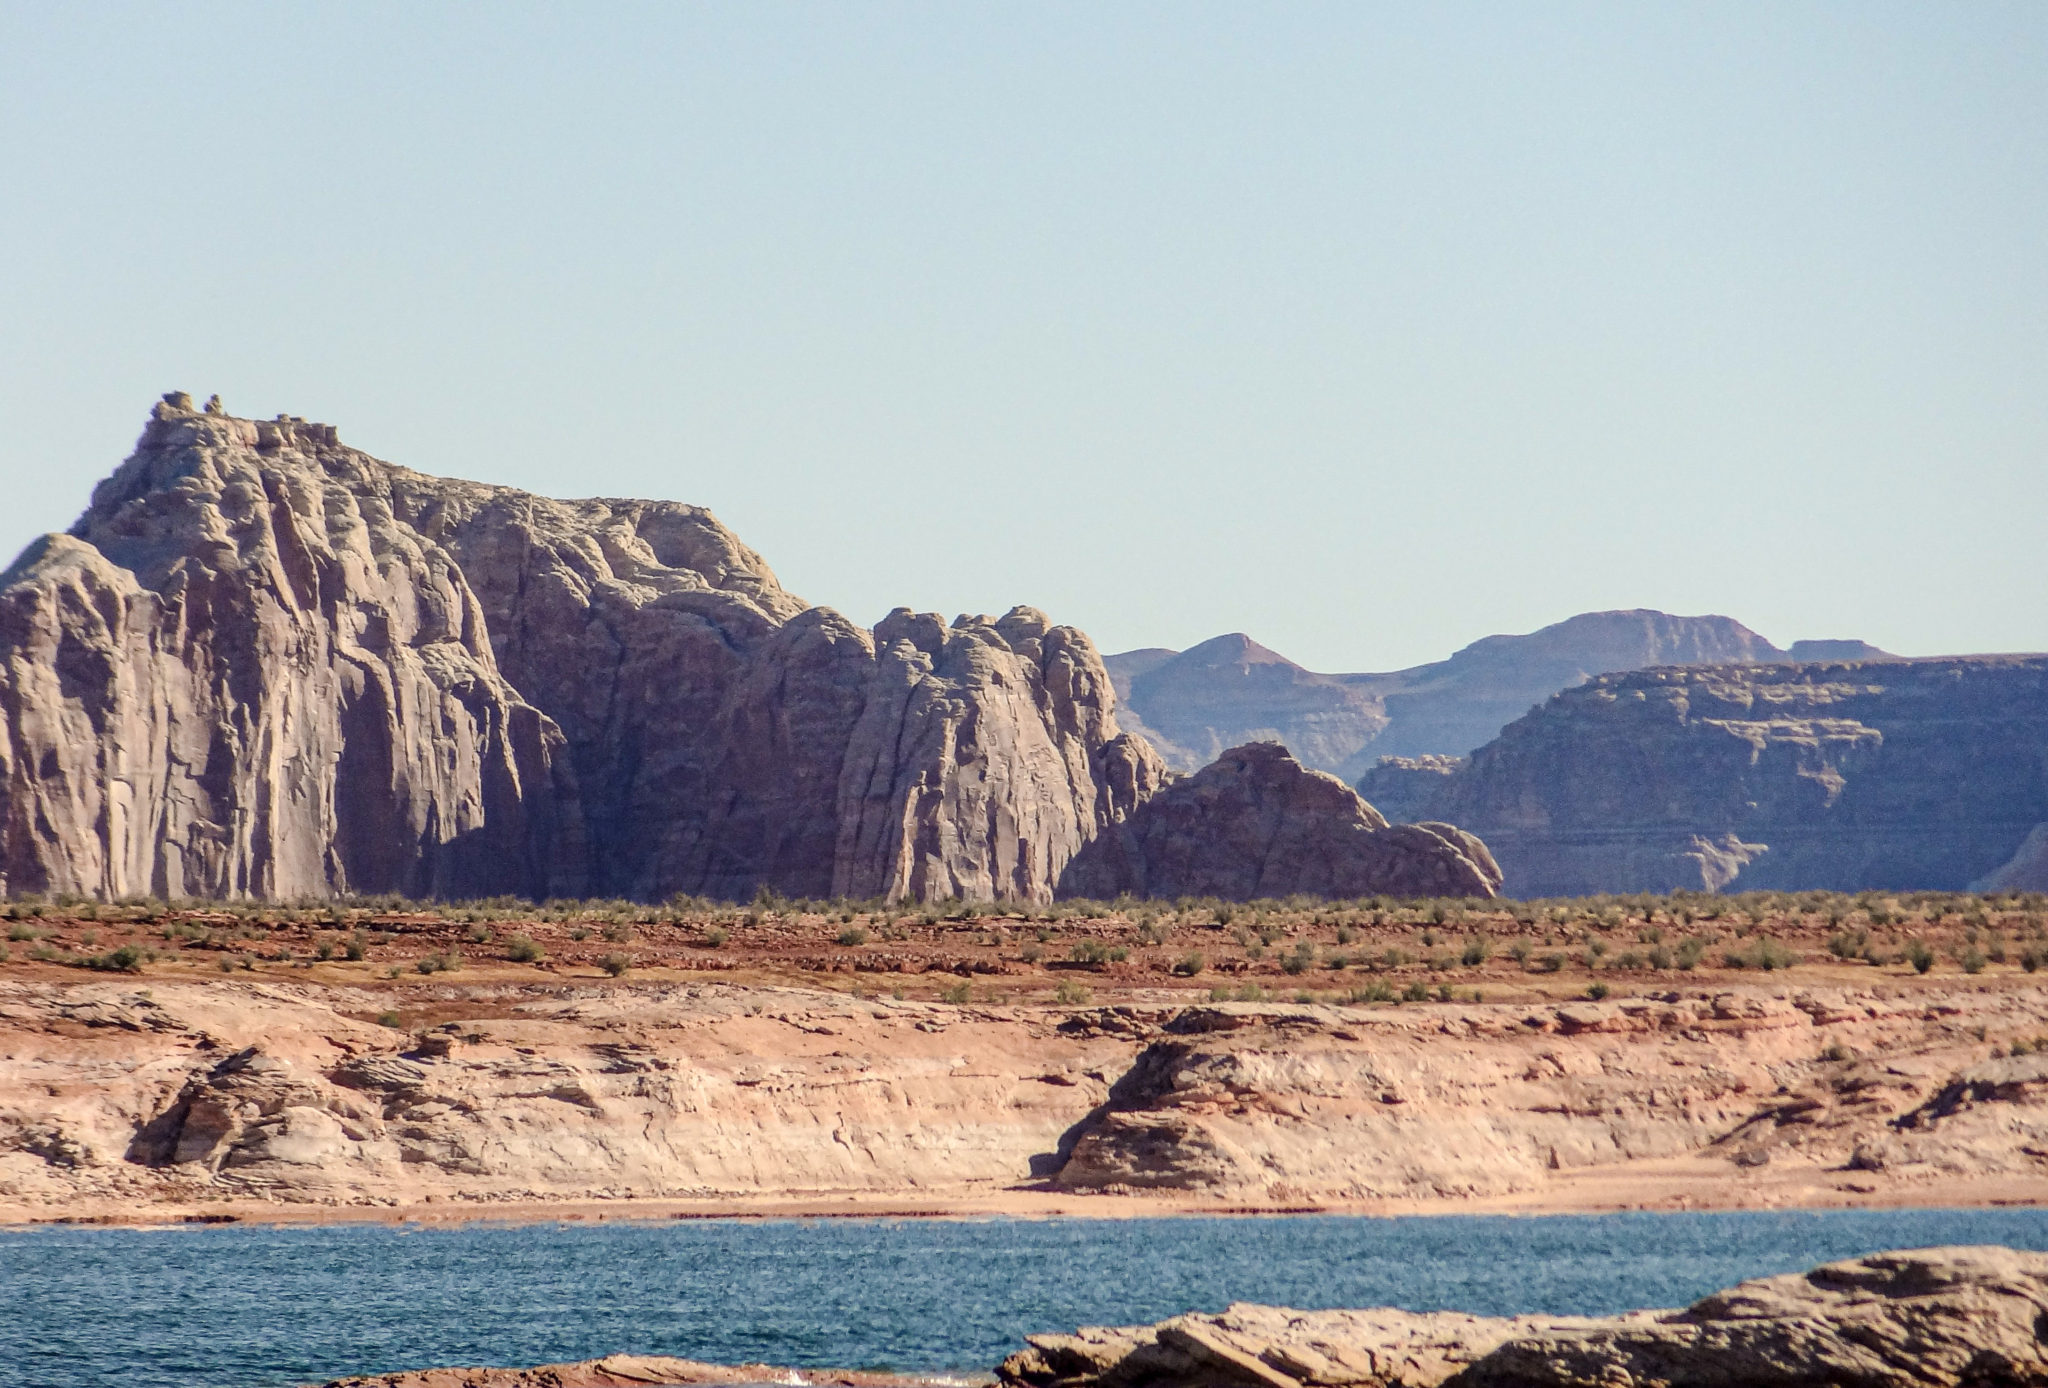 You'll never tire of the views of the mesas and rock formations that line the shores of Lake Powell! When you take the Rainbow Bridge Boat Tour, you get to see these beauties for hours!